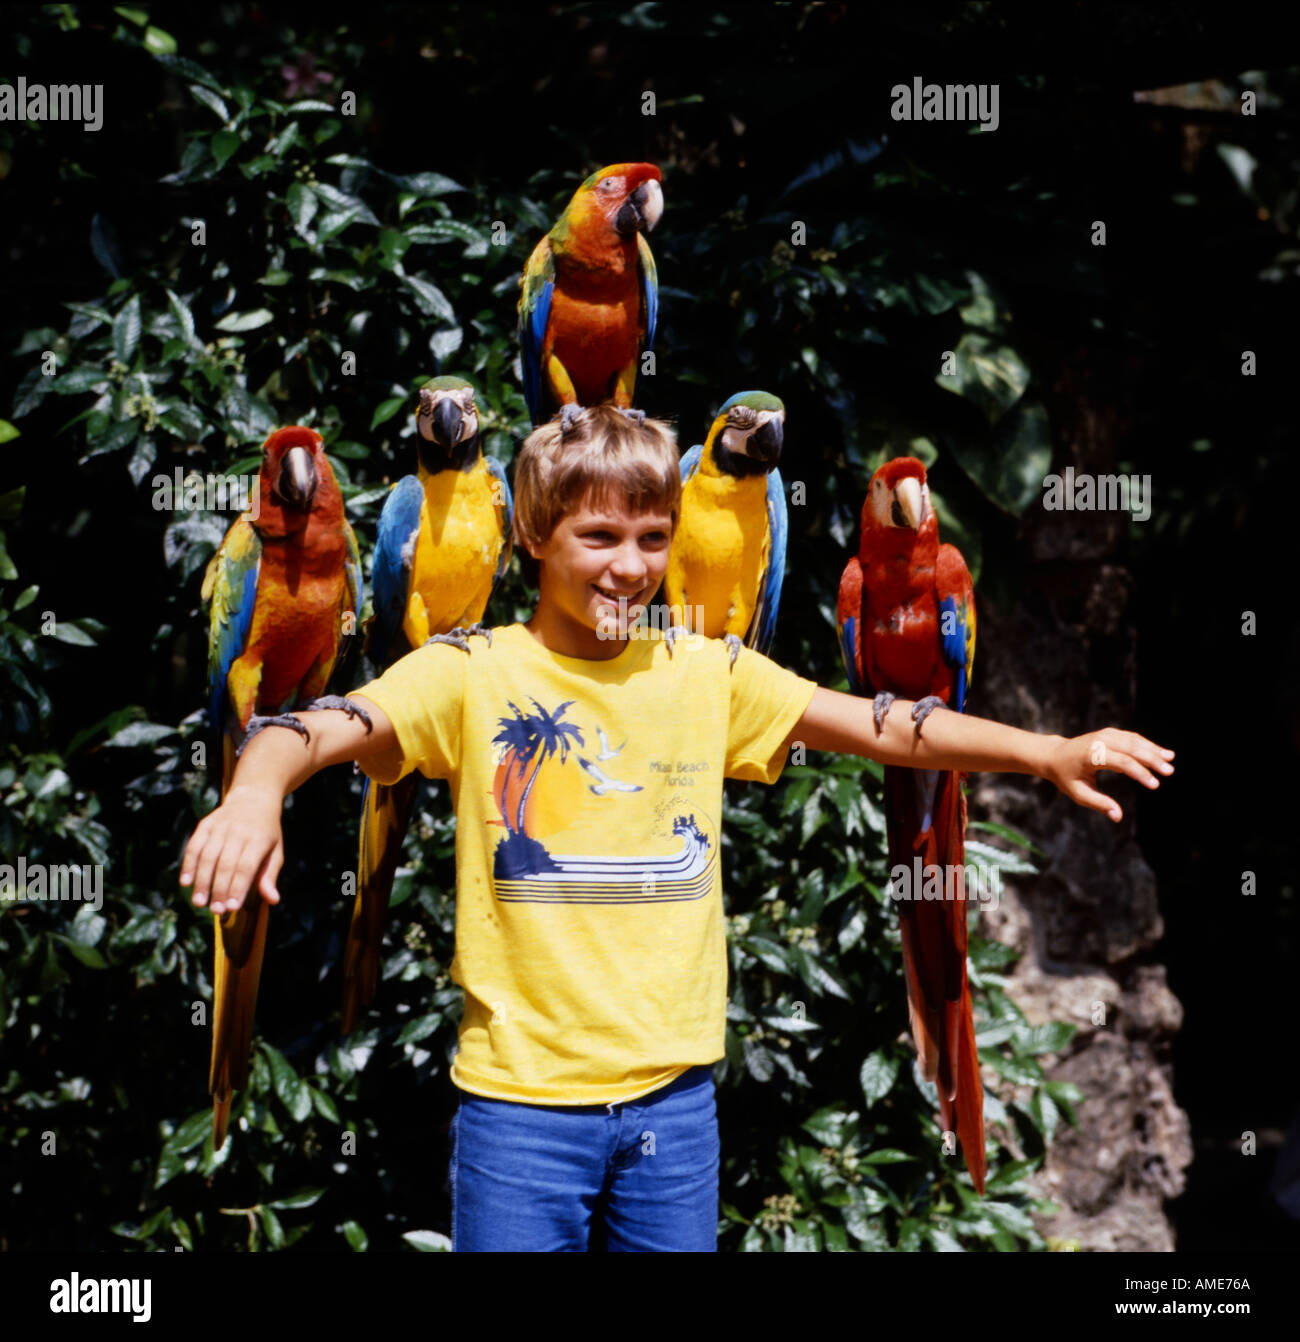 Enchanted young boy is holding out his arms on which are perched five multicolored parrots Stock Photo